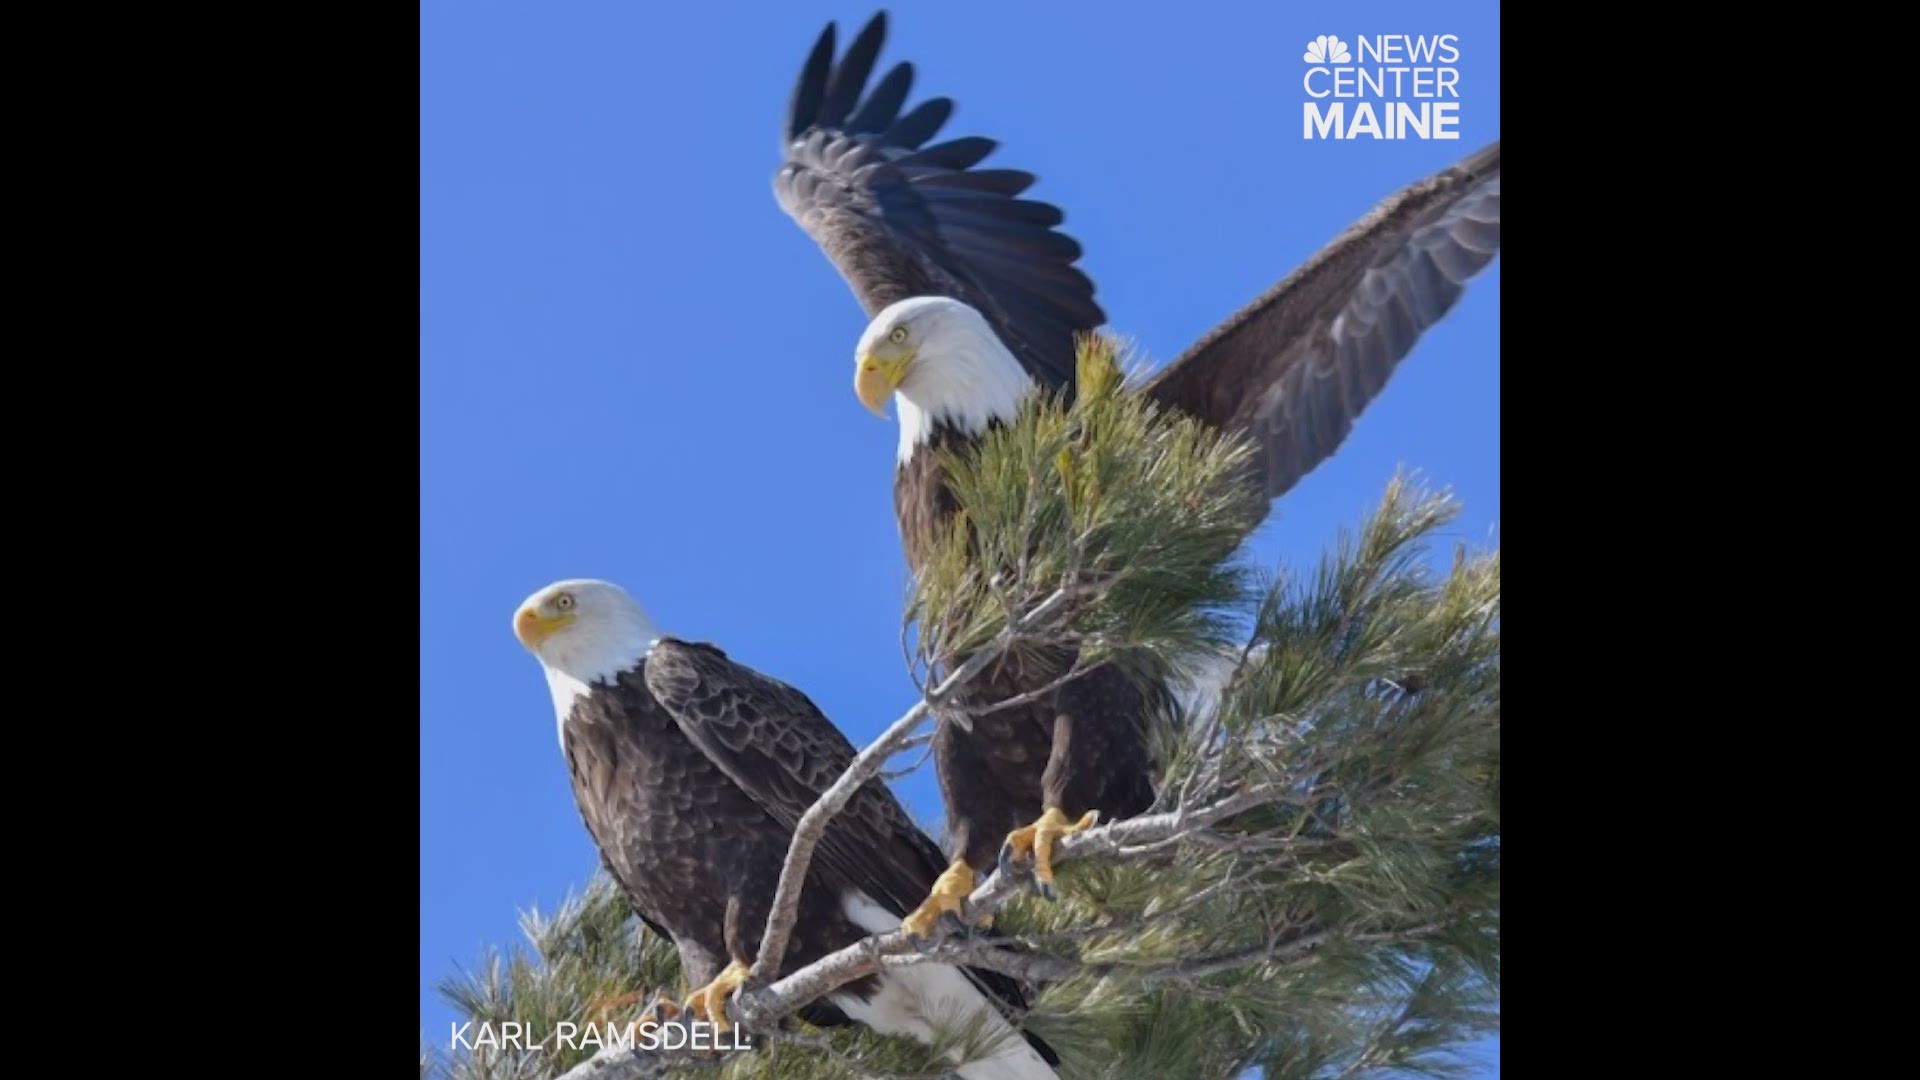 Karl Ramsdell has been watching the same Bald Eagle couple for years in Cumberland County.